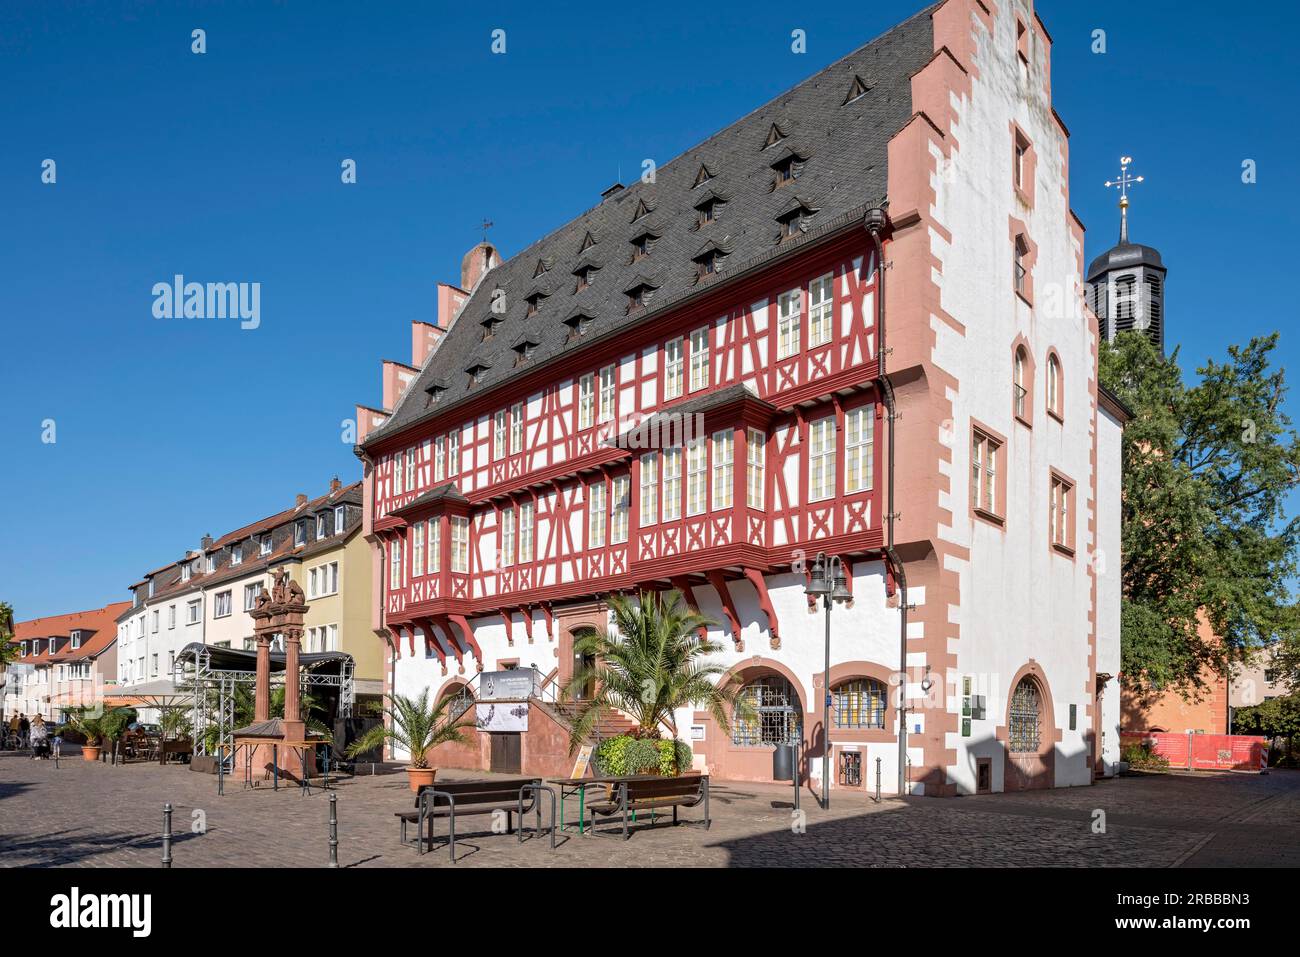 German Goldsmith's House, historic Old Town Hall, half-timbered house, Old Town Market, Old Town, Hanau, Hesse, Germany Stock Photo